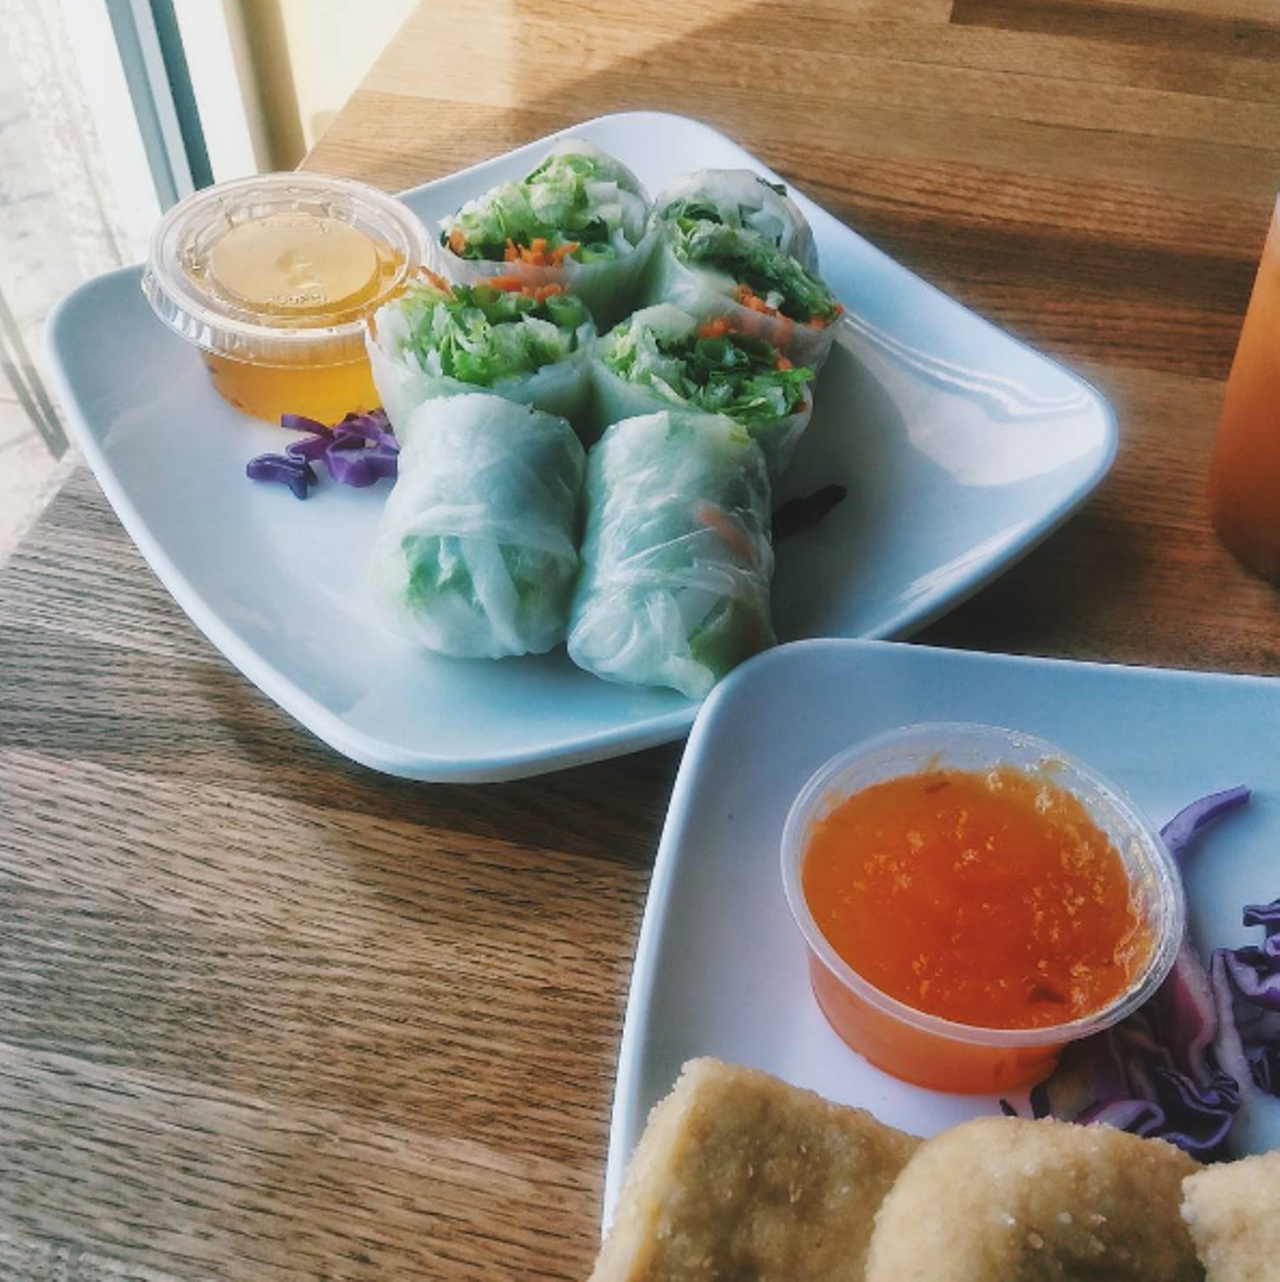 Go Sy Thai
Though this is restaurant offers the usual Thai fare (meat and all), gluten-free, vegetarian, and vegan options are all available upon request.
(313) 638-1467
4240 Cass Ave, 
Detroit, MI 48201
photo via IG user @thedetroitgirl